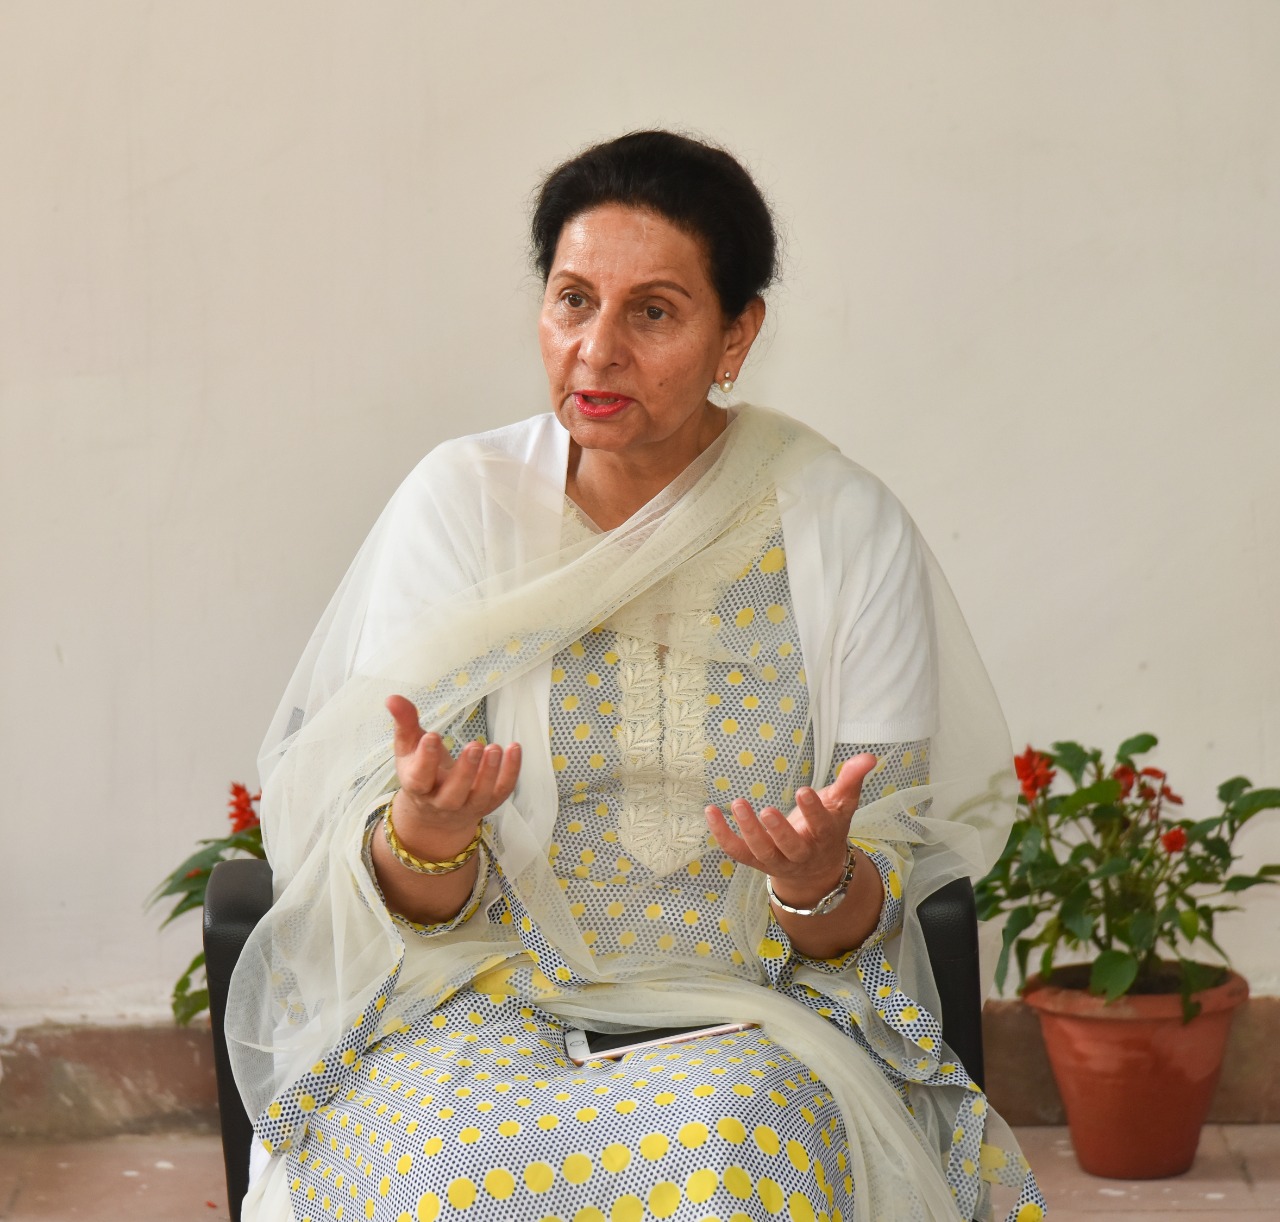 Punjab: Patiala MP Preneet Kaur hits back at Congress, questions disciplinary action taken against her